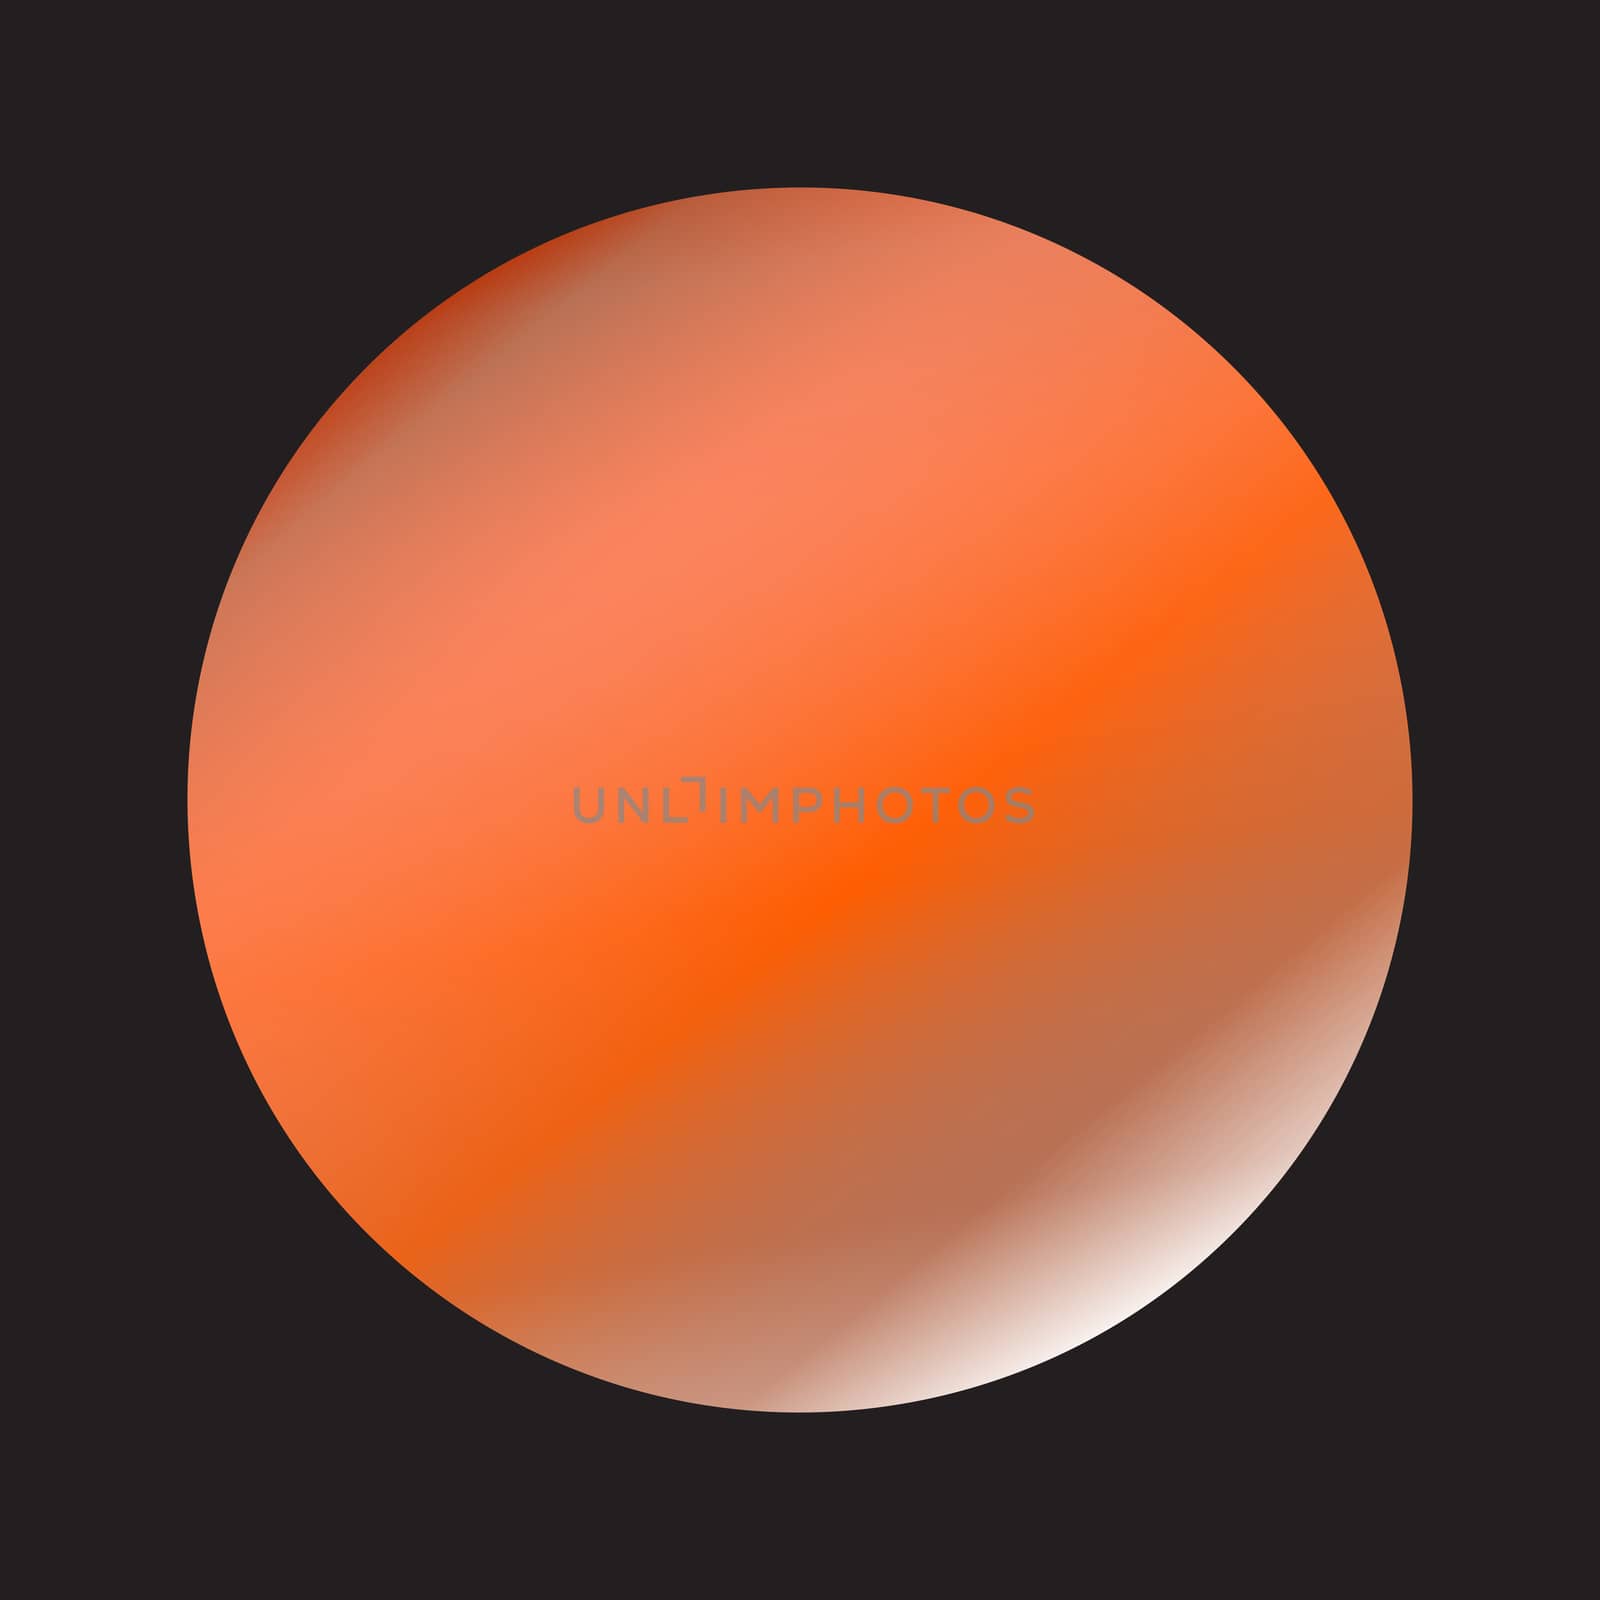 A representation of the planet Mars over a black background